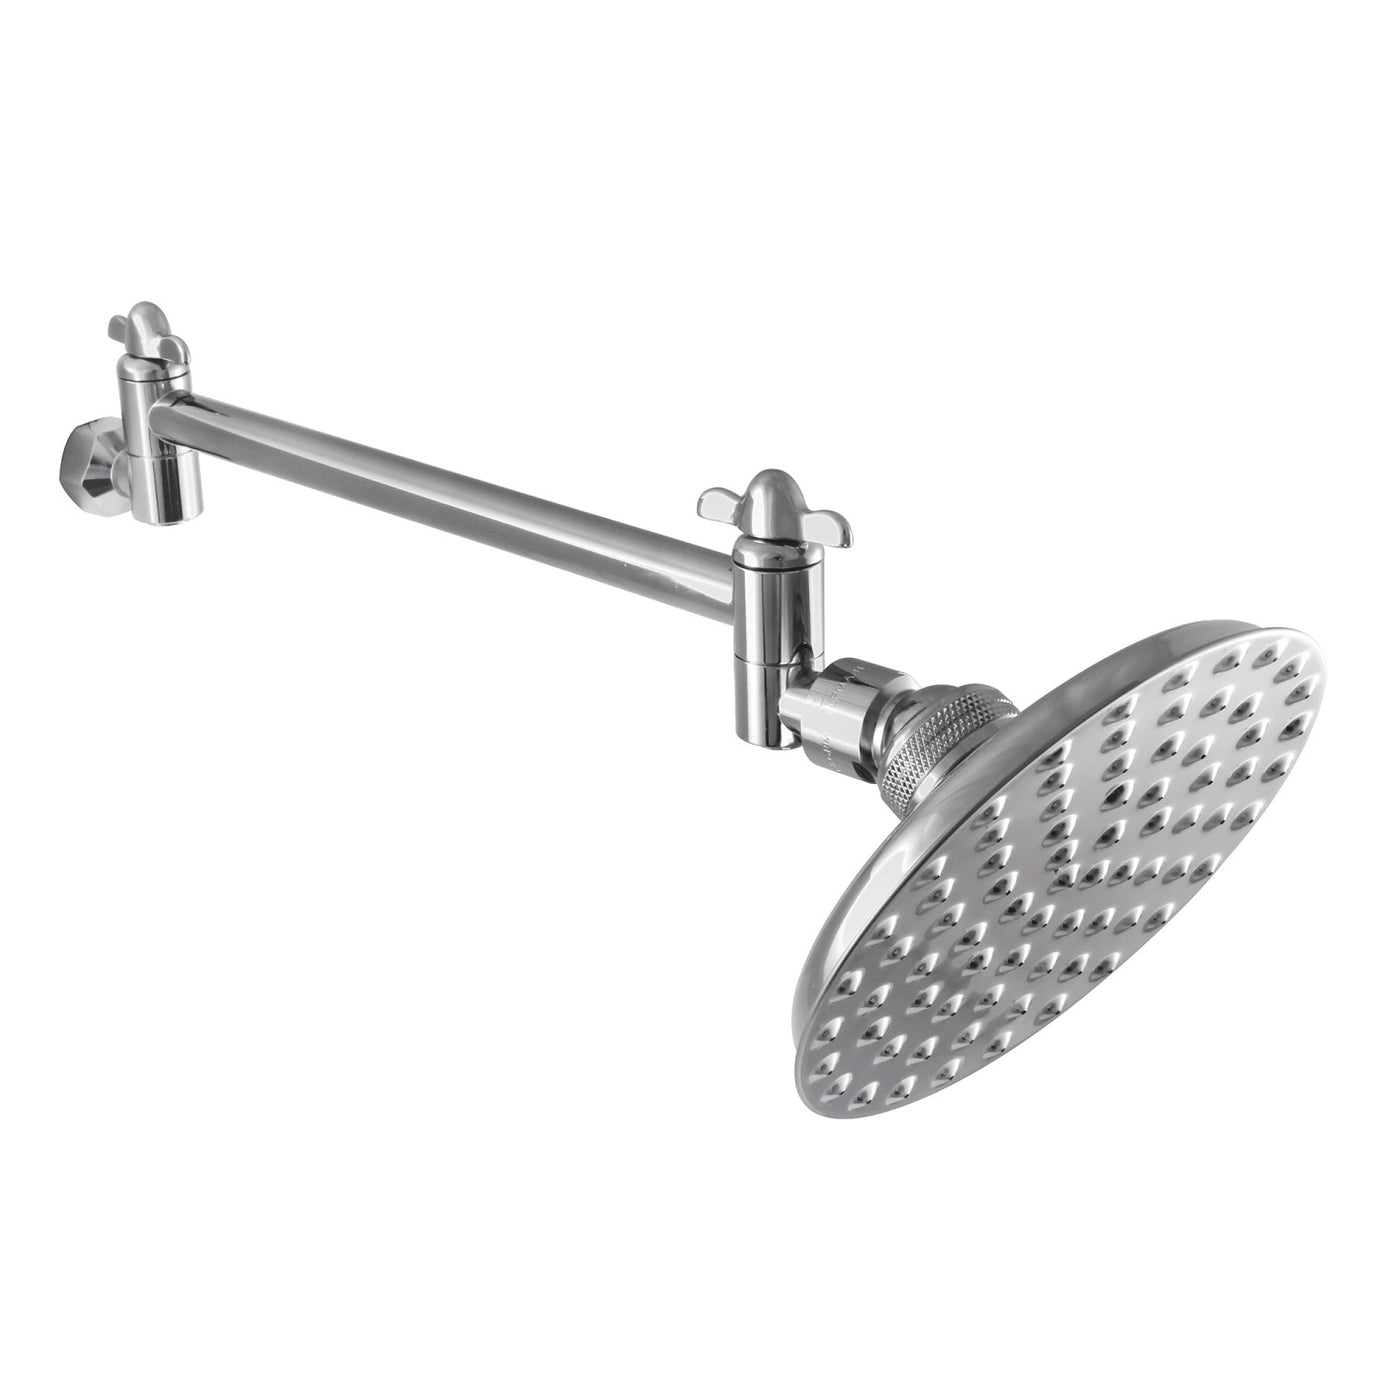 Elements of Design DCK13521 5" Showerhead with High Low Adjustable Arm, Polished Chrome